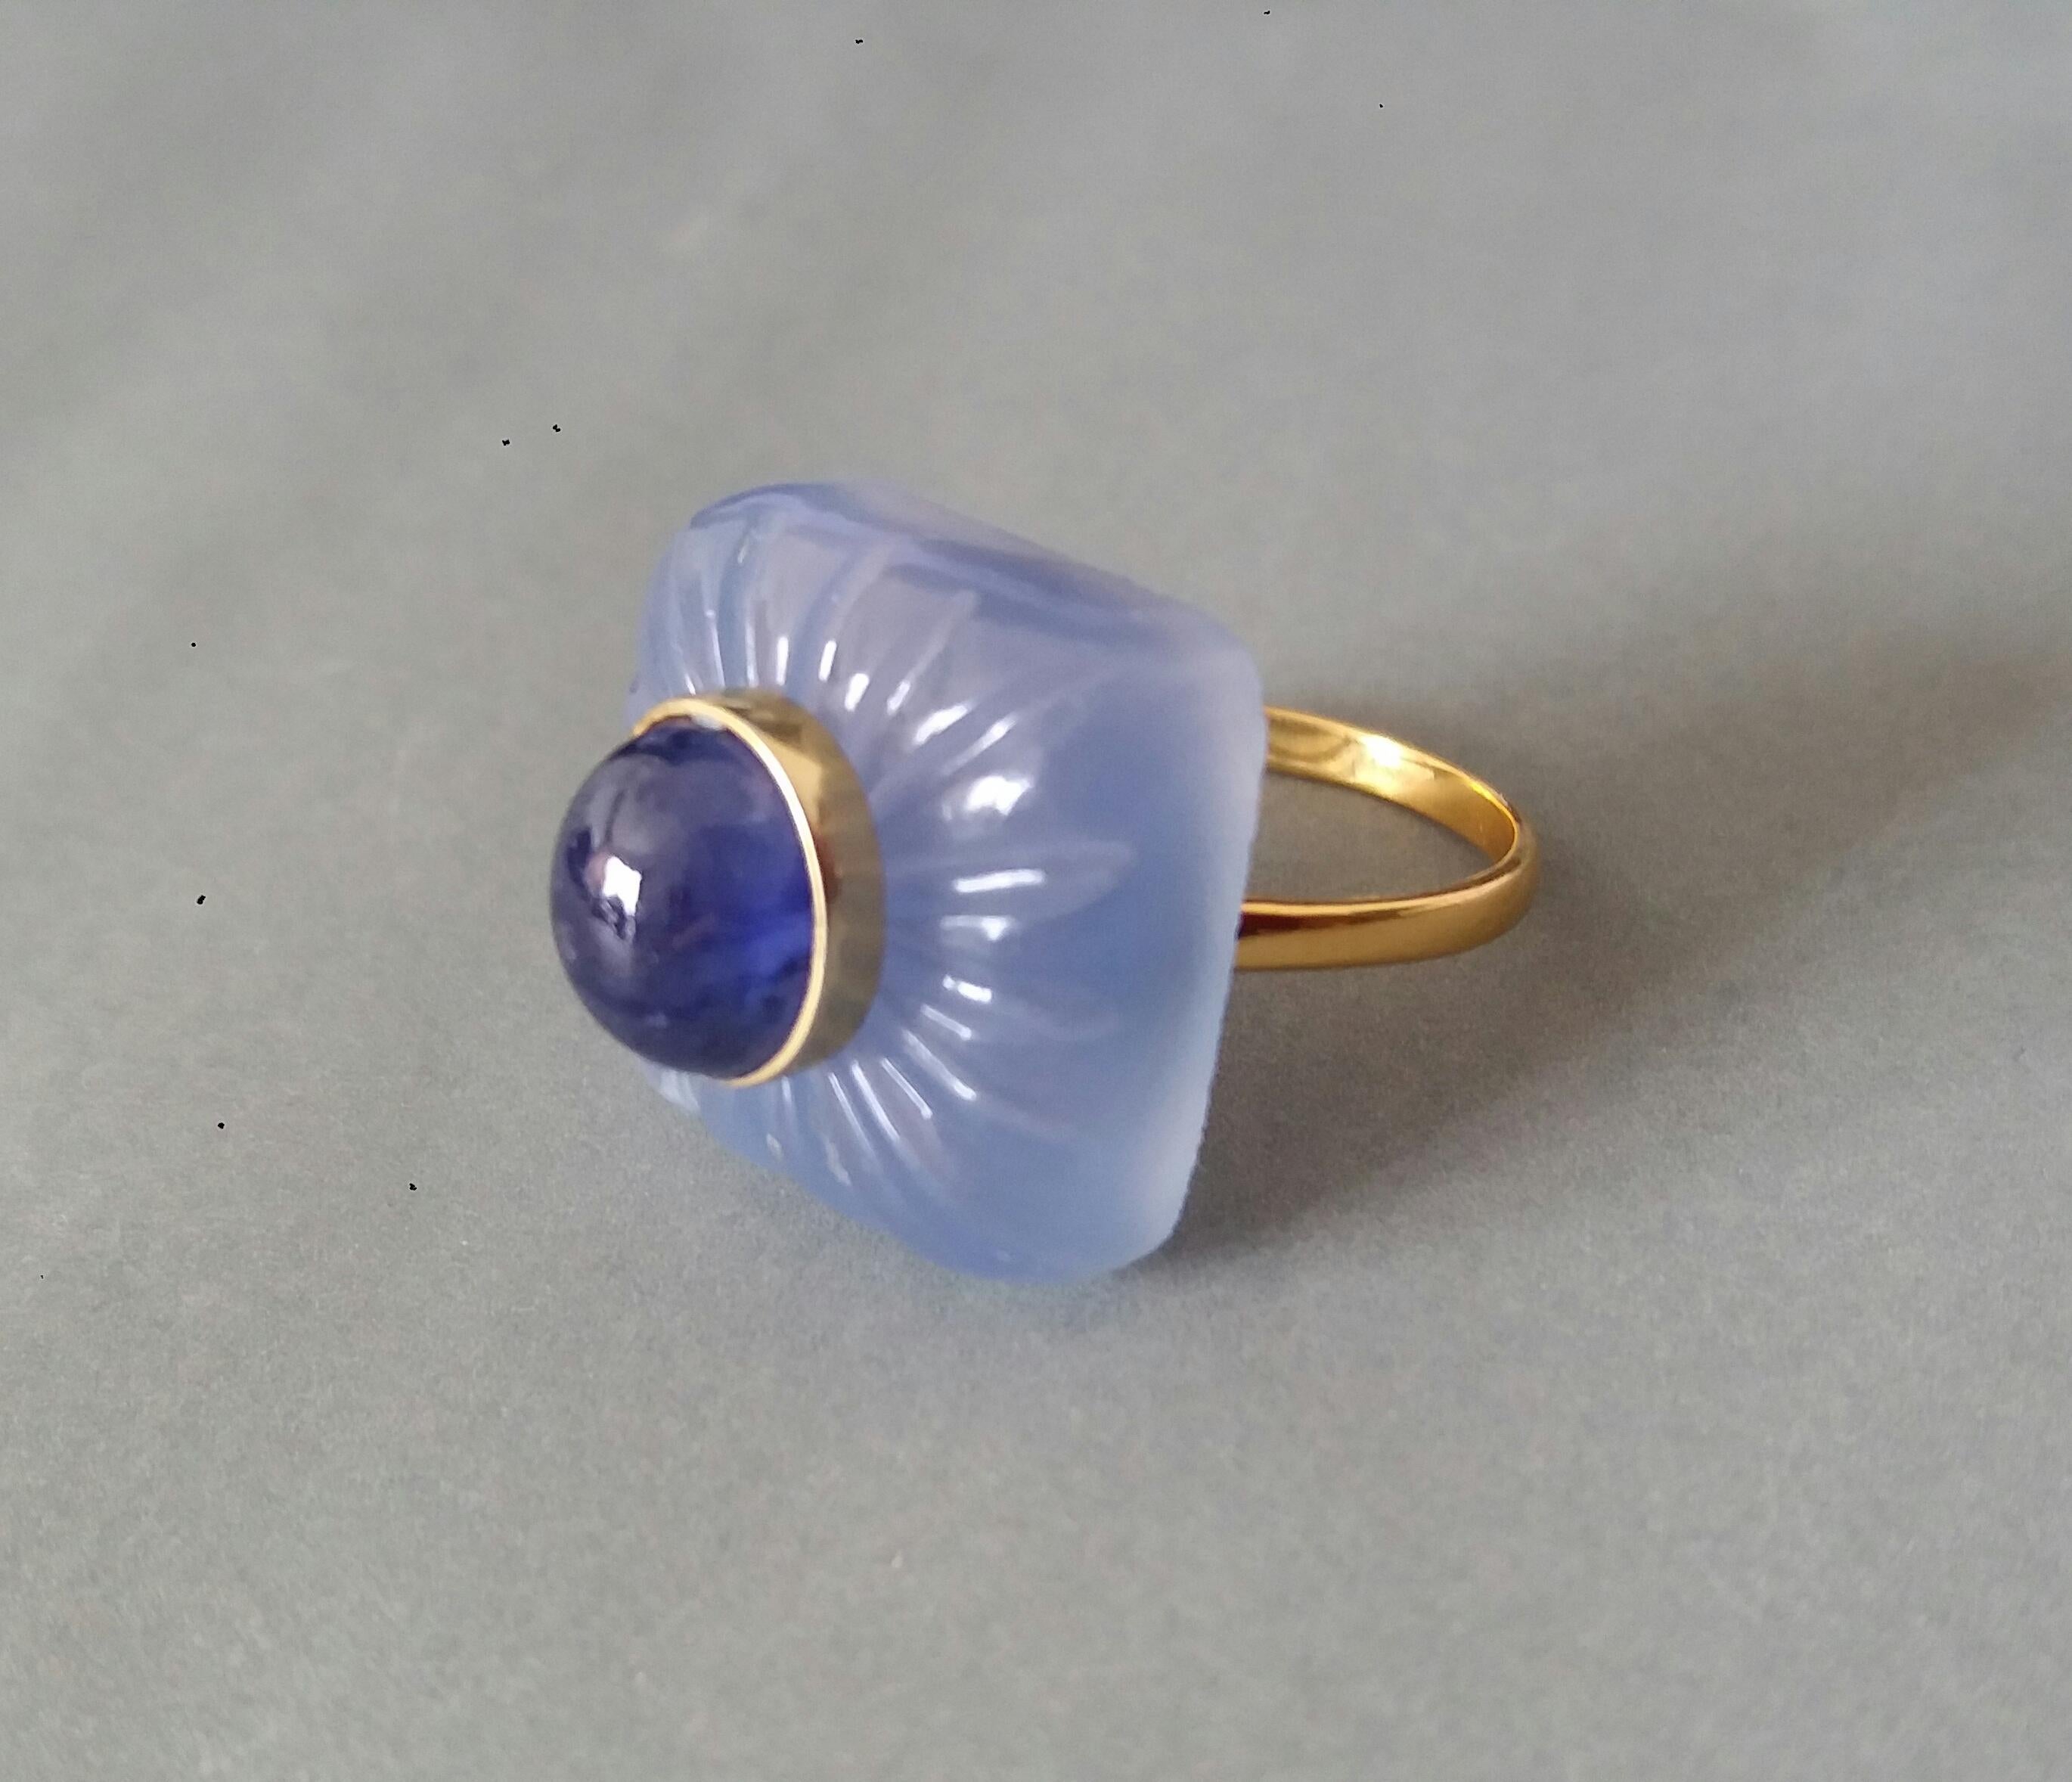 Classic and elegant ring composed of a engraved Blue Chalcedony Cushion Cabochon measuring 19x19mm  surmounted by a Oval Blue Sapphire Cabochon measuring 7x9mm set in a 14k yellow gold bezel...The shank  is also in 14k  solid Yellow Gold 

In 1978